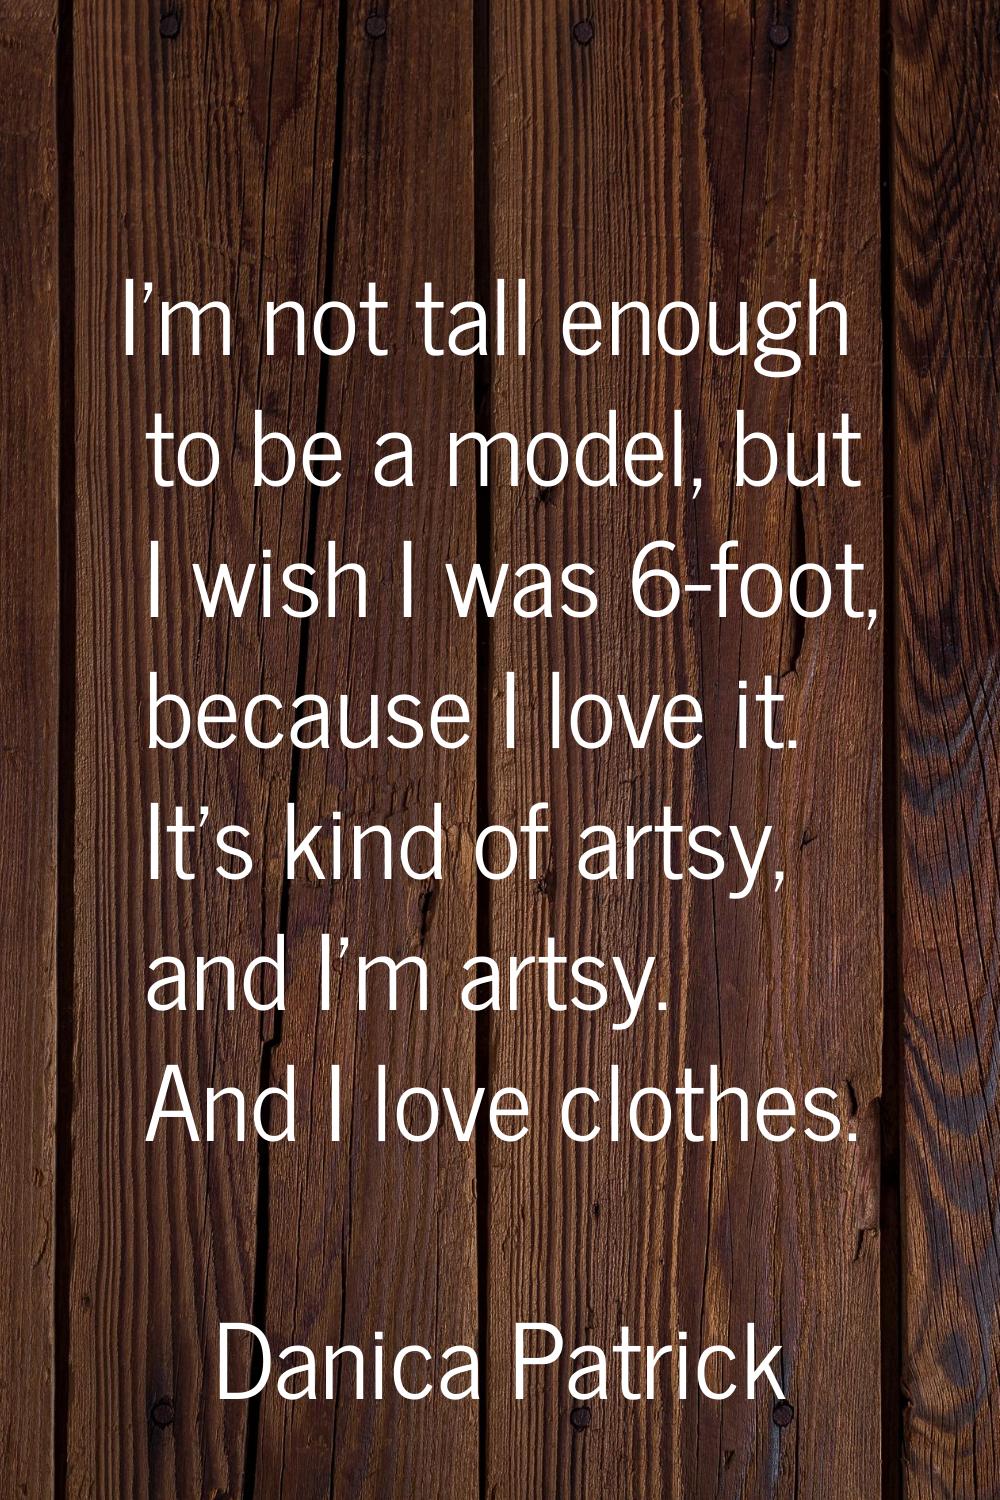 I'm not tall enough to be a model, but I wish I was 6-foot, because I love it. It's kind of artsy, 